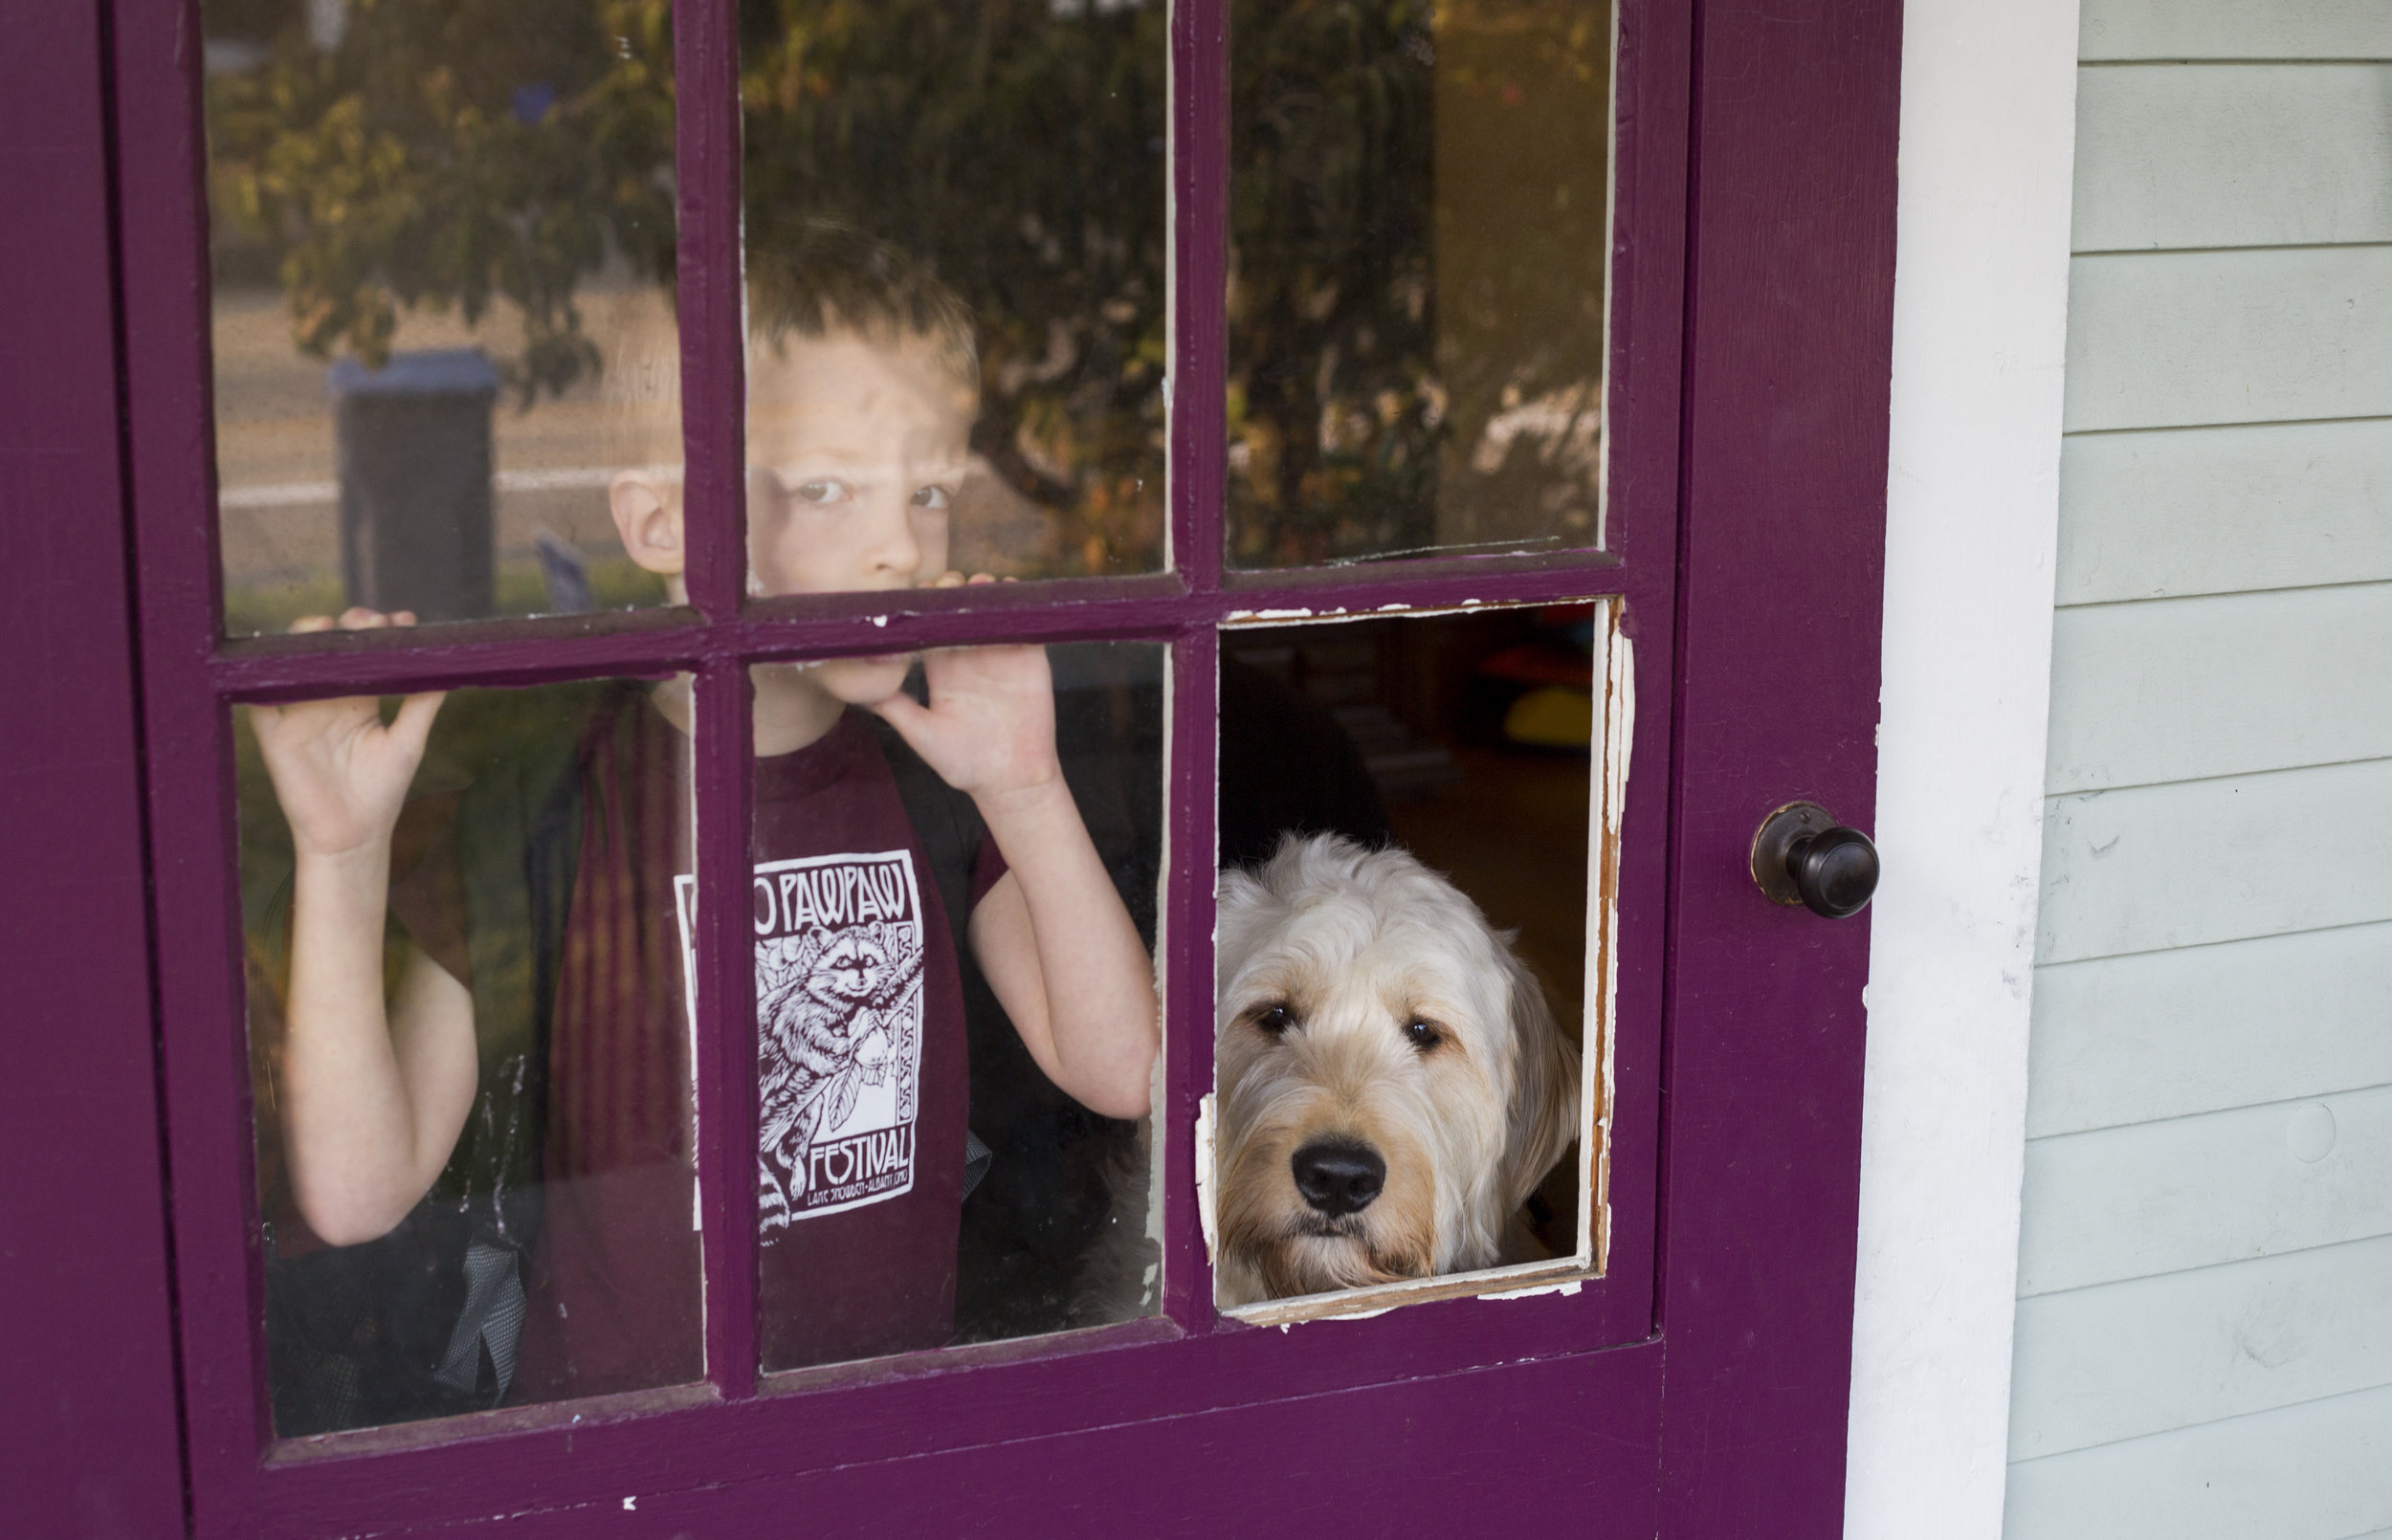  Josiah and Spad, Josiah’s service dog, look out the front door of their home on East State Street in Athens, Ohio before leaving for school on September 21, 2017. Josiah got Spad in May 2017 to help him manage challenges associated with autism spect